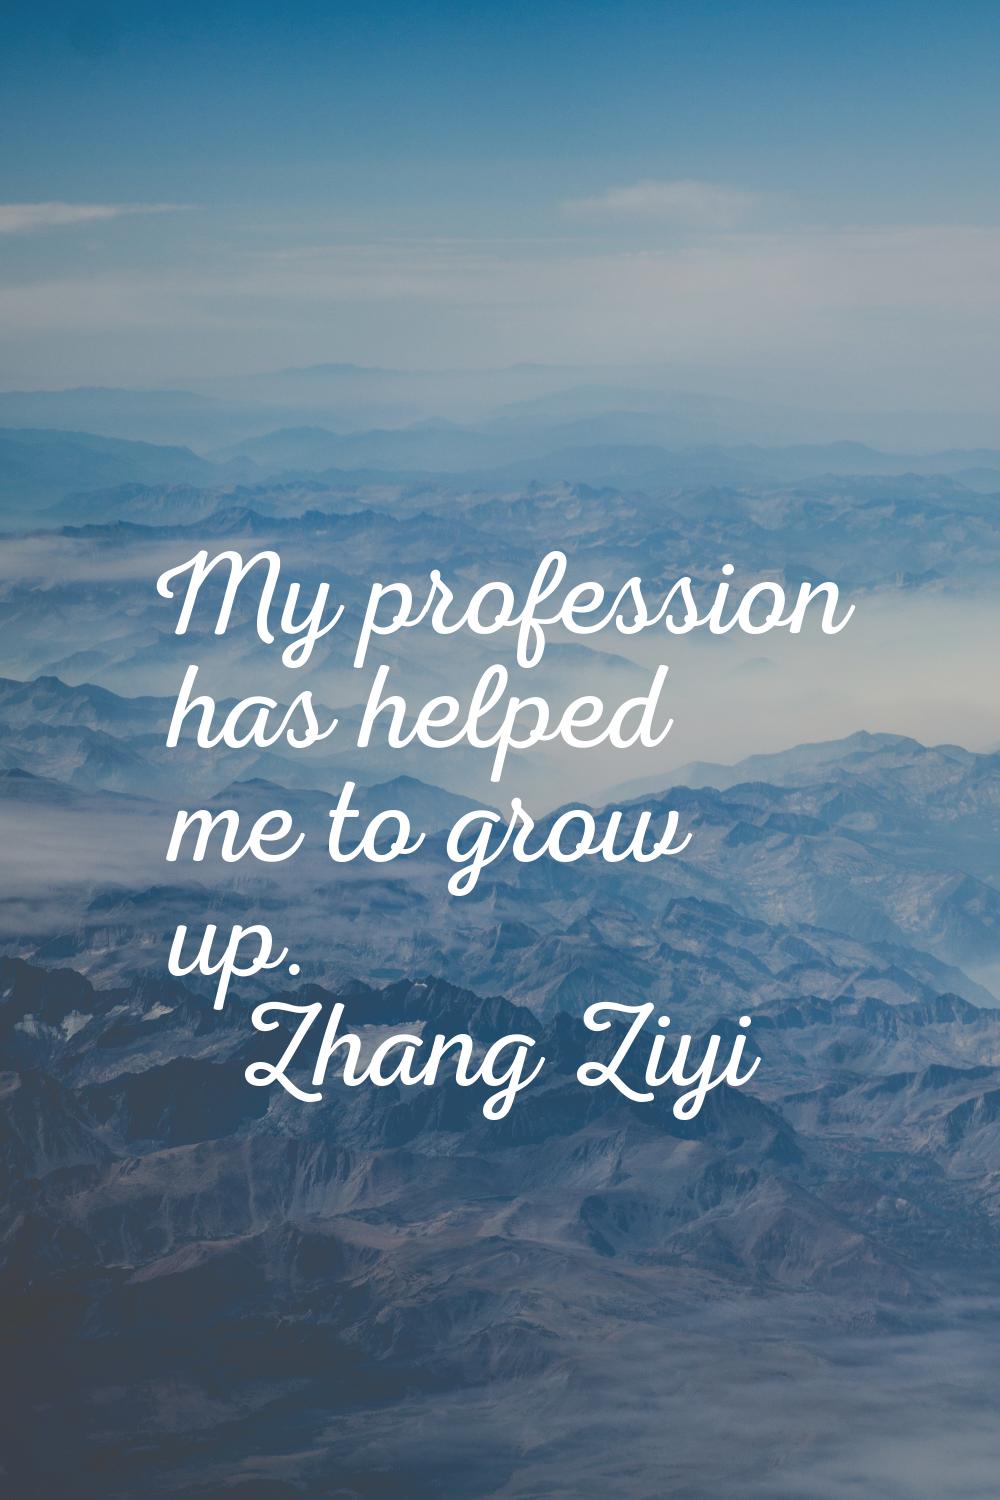 My profession has helped me to grow up.